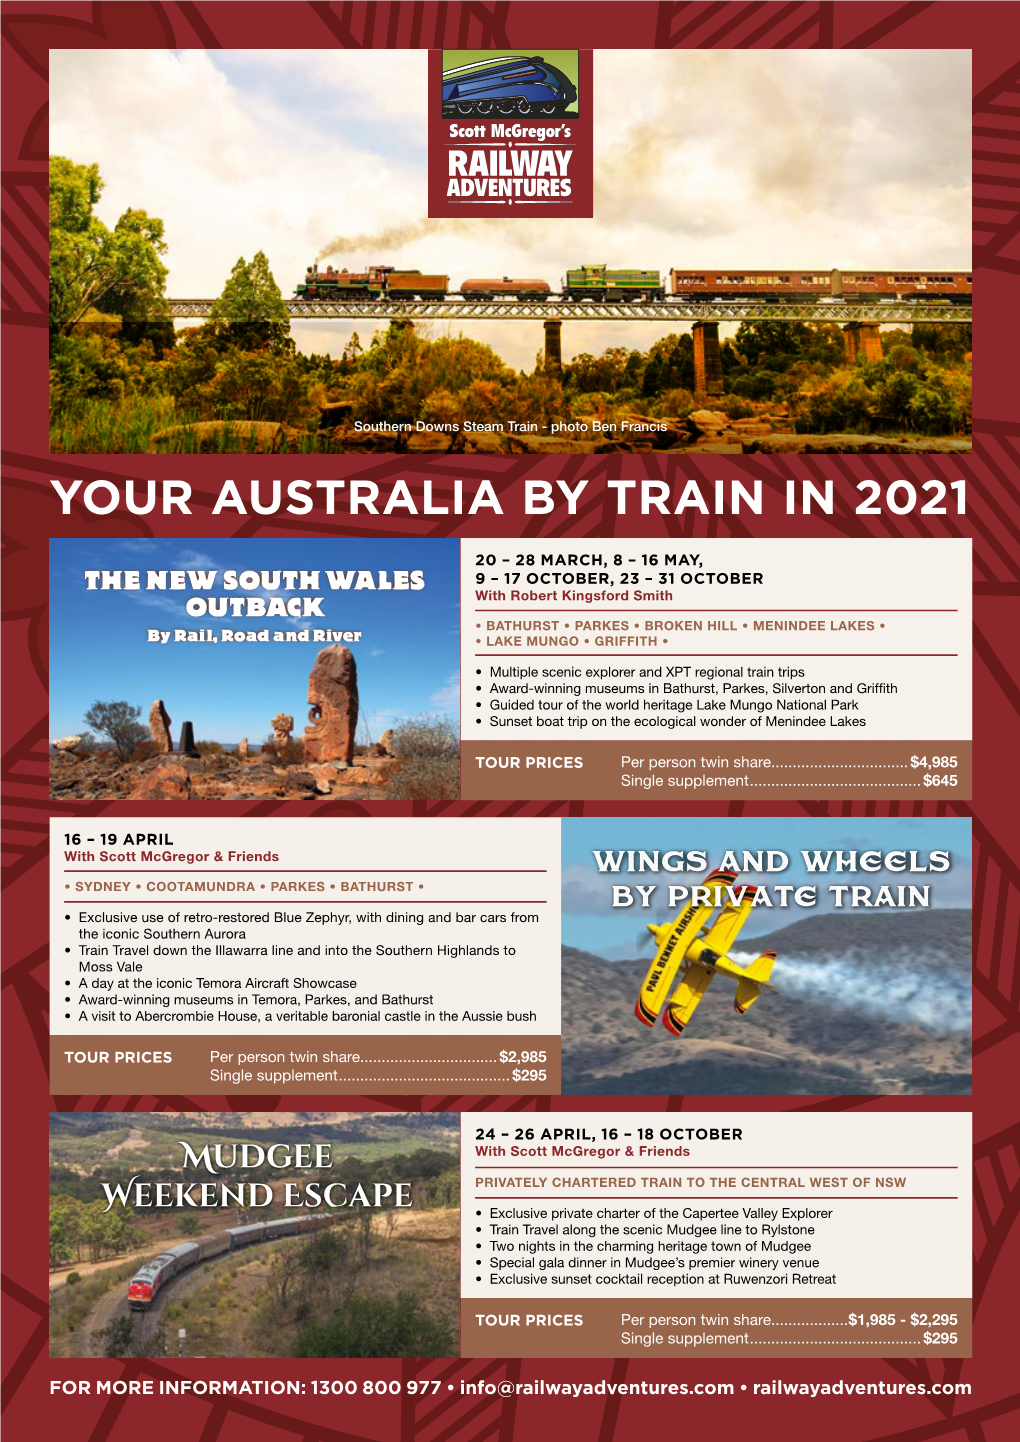 Your Australia by Train in 2021